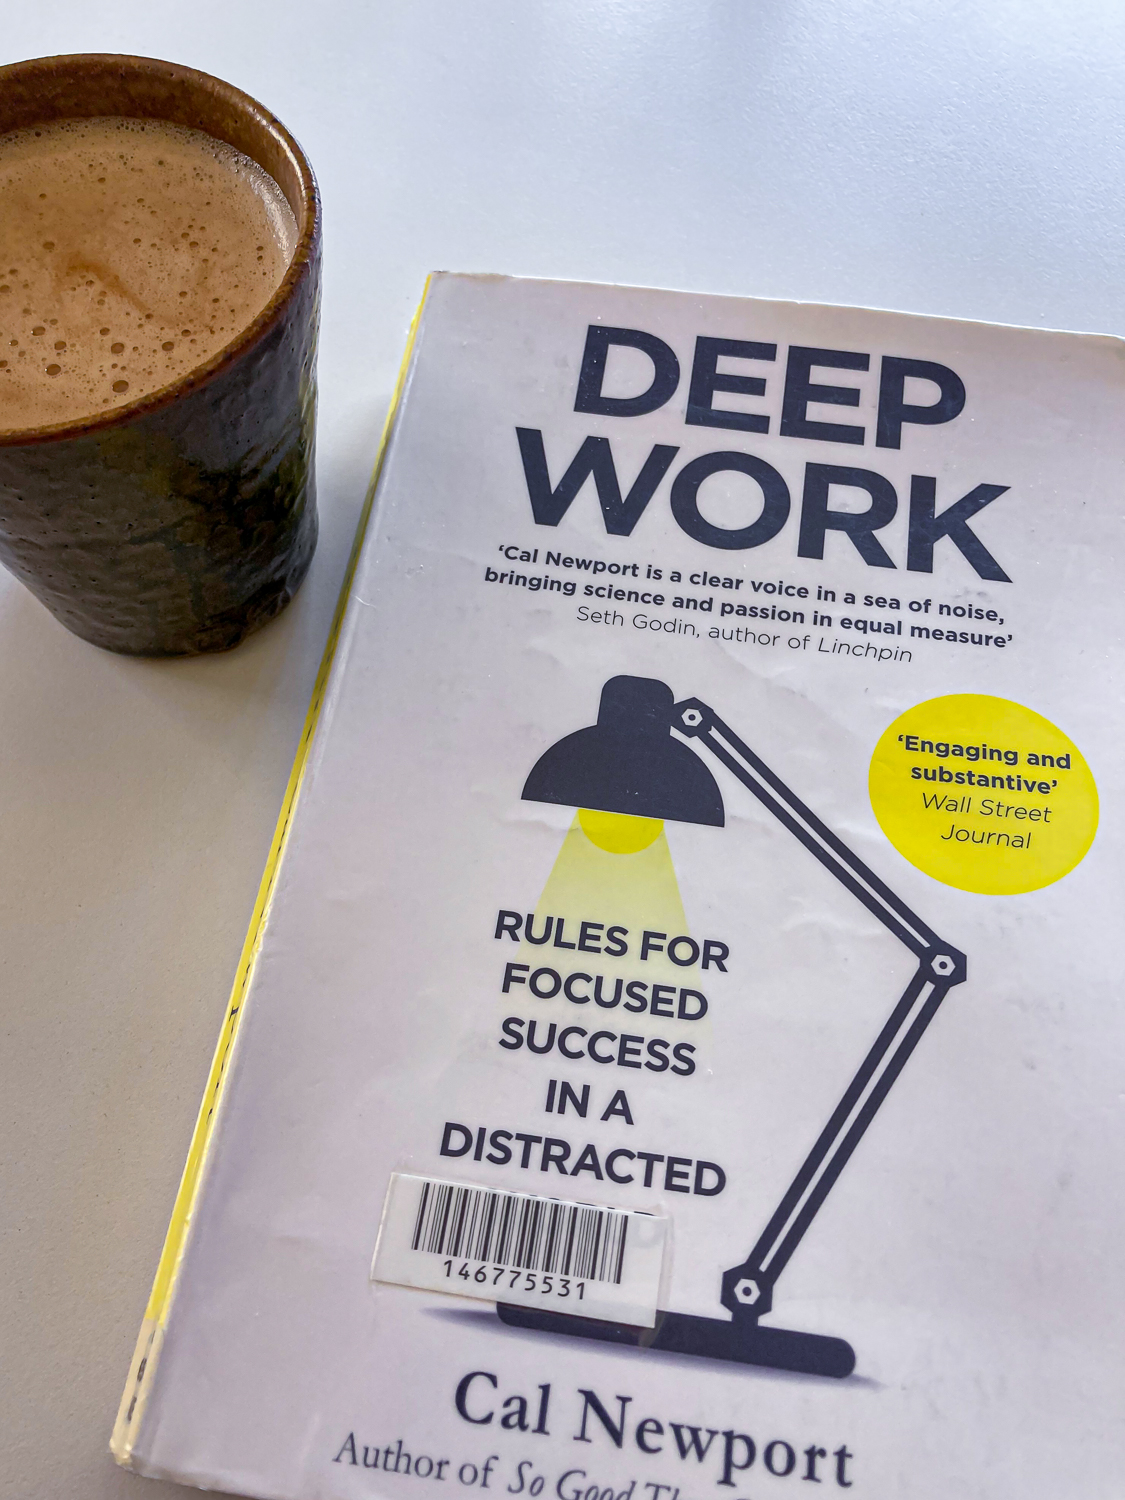 The book Deep Work by Cal Newport next to a cup of coffee